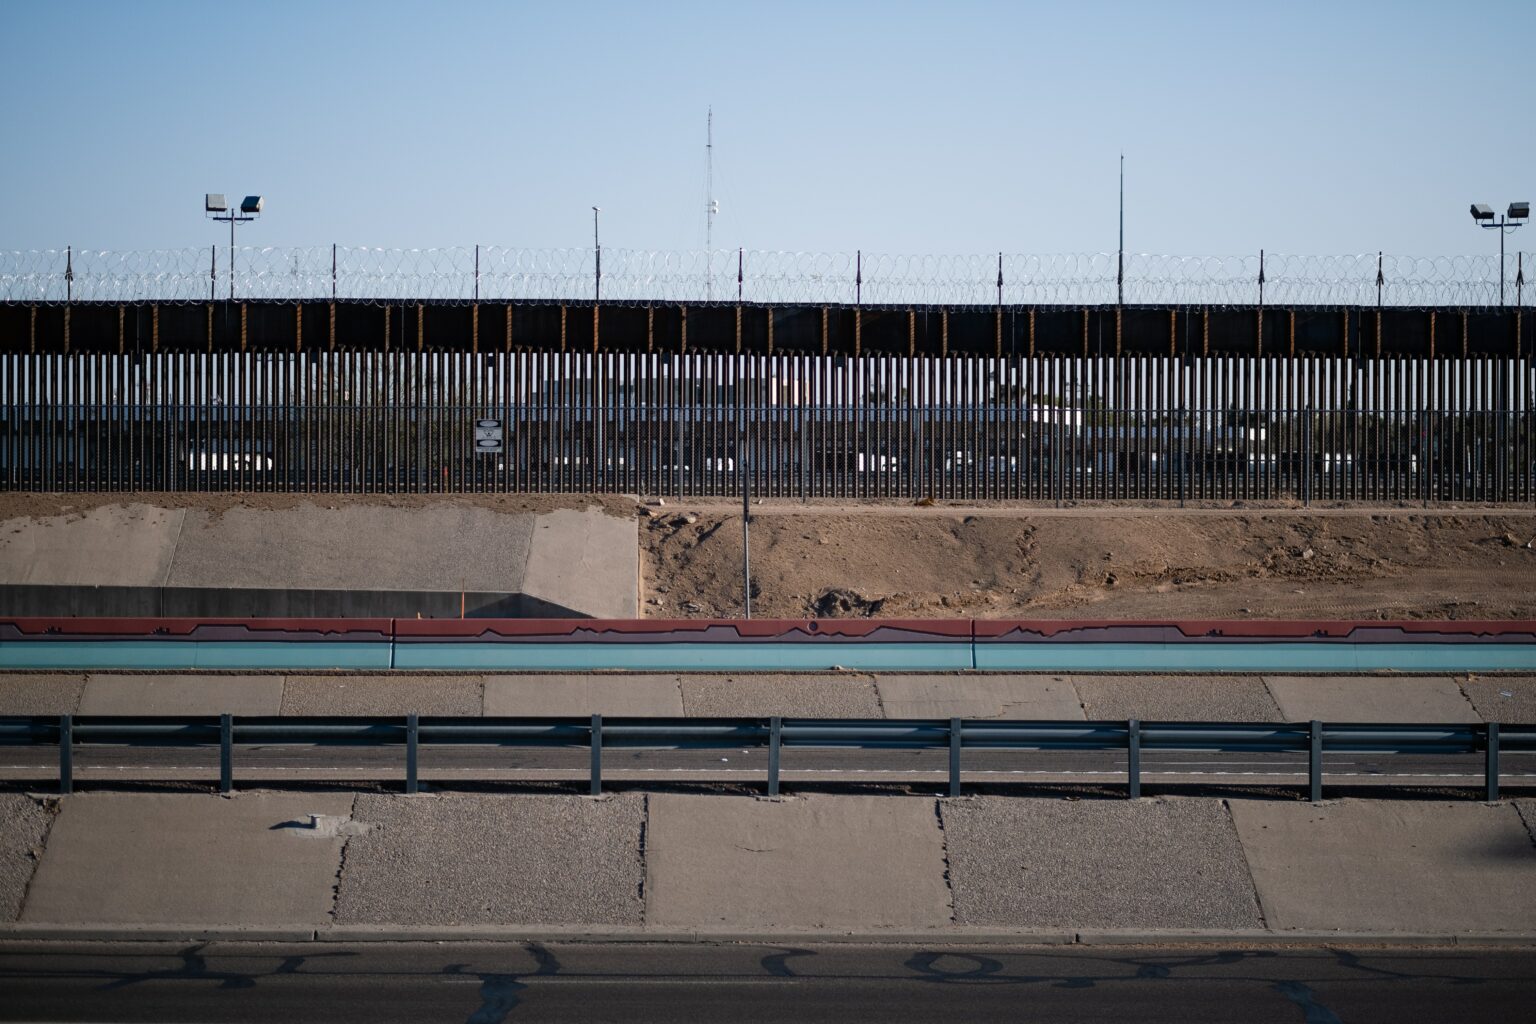 Refugees at US-Mexico Border Photo by Levi Meir Clancy on Unsplash